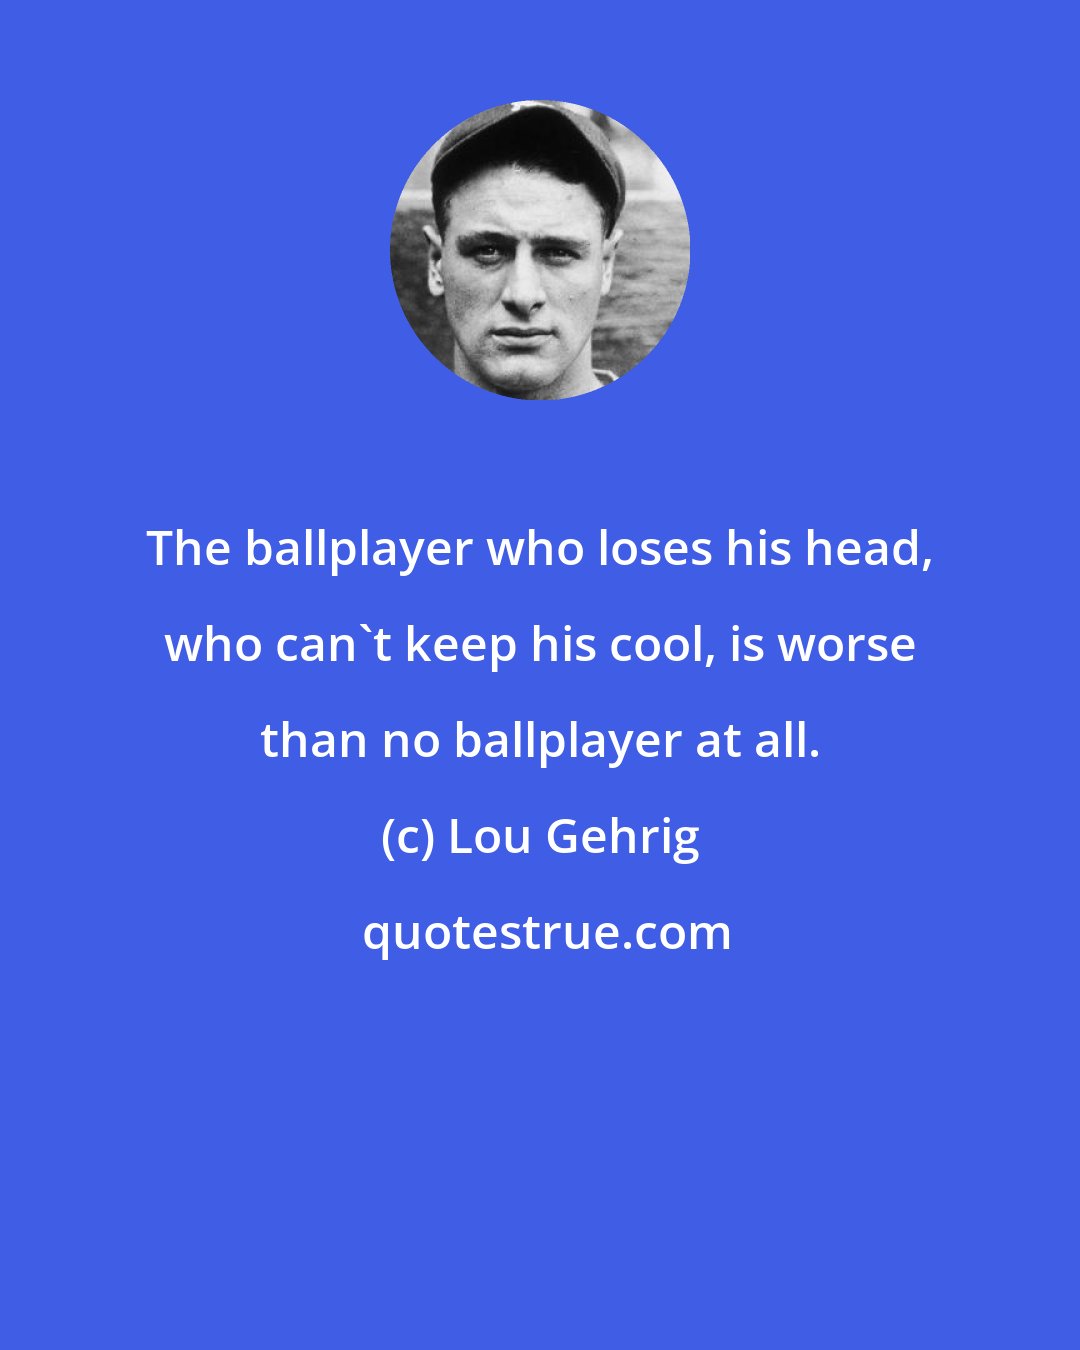 Lou Gehrig: The ballplayer who loses his head, who can't keep his cool, is worse than no ballplayer at all.